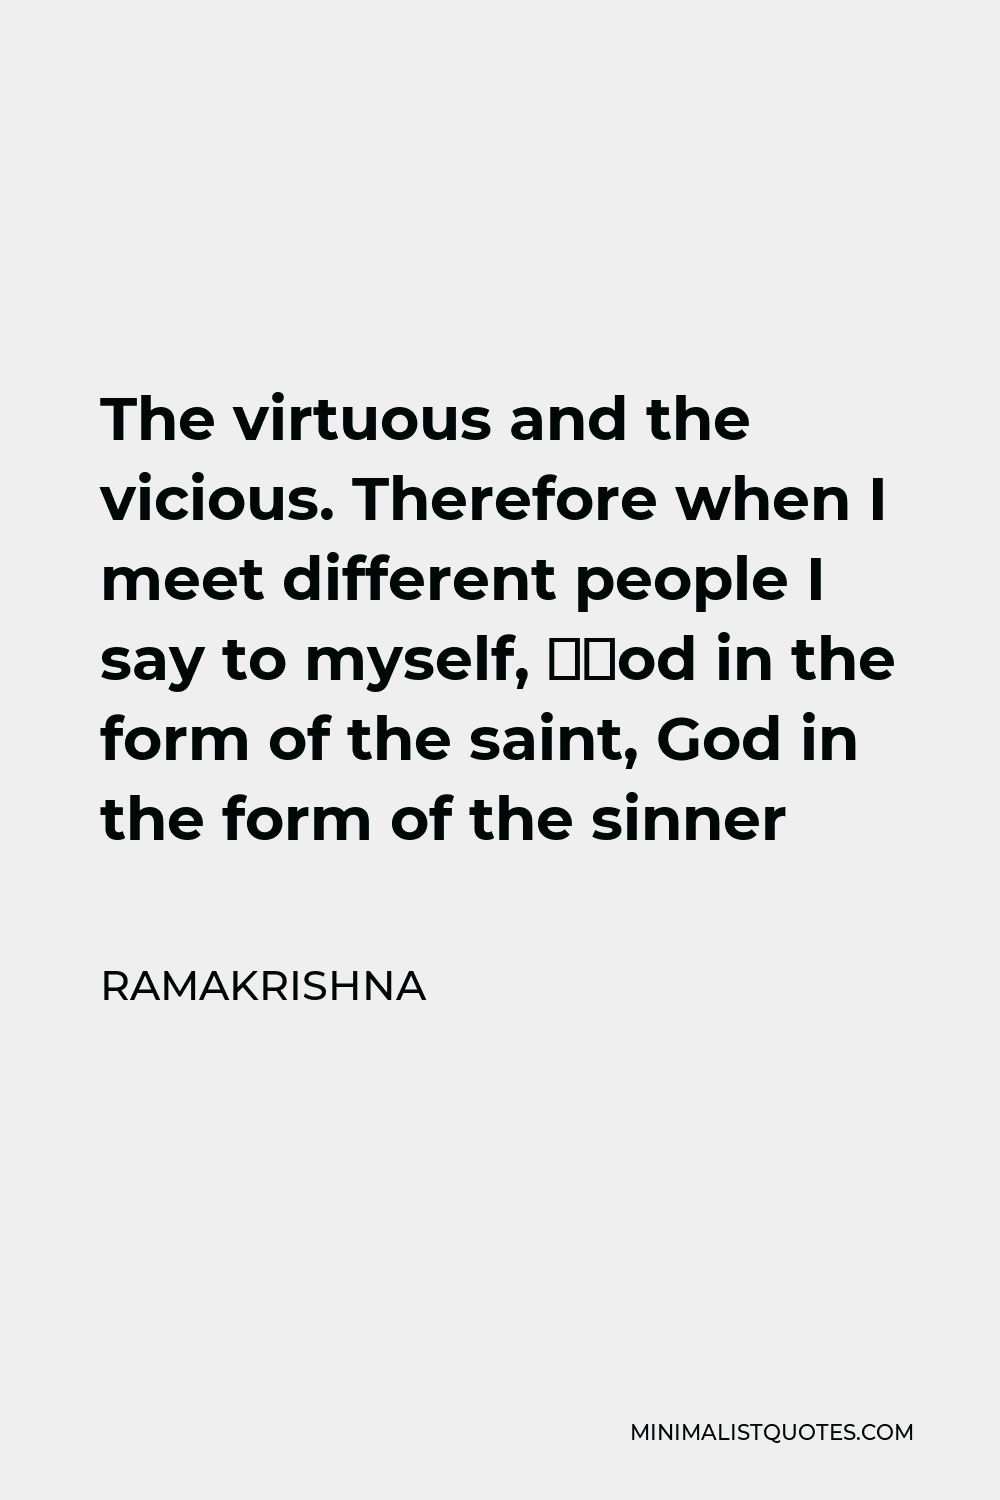 Ramakrishna Quote - The virtuous and the vicious. Therefore when I meet different people I say to myself, “God in the form of the saint, God in the form of the sinner